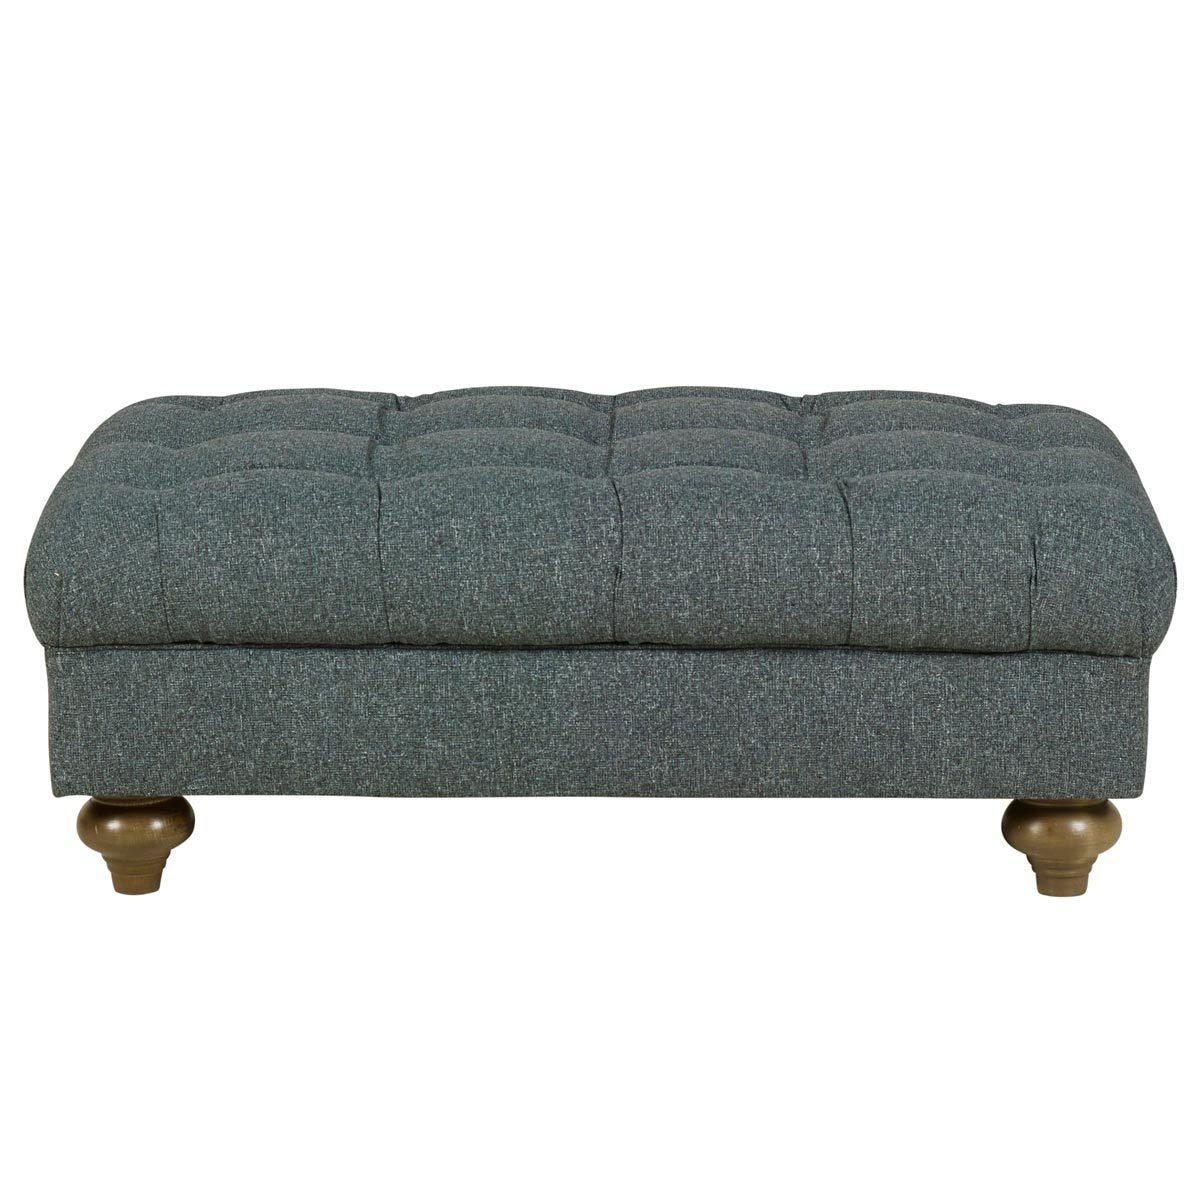 Bordeaux Buttoned Fabric Footstool, Grey - Signature Retail Stores